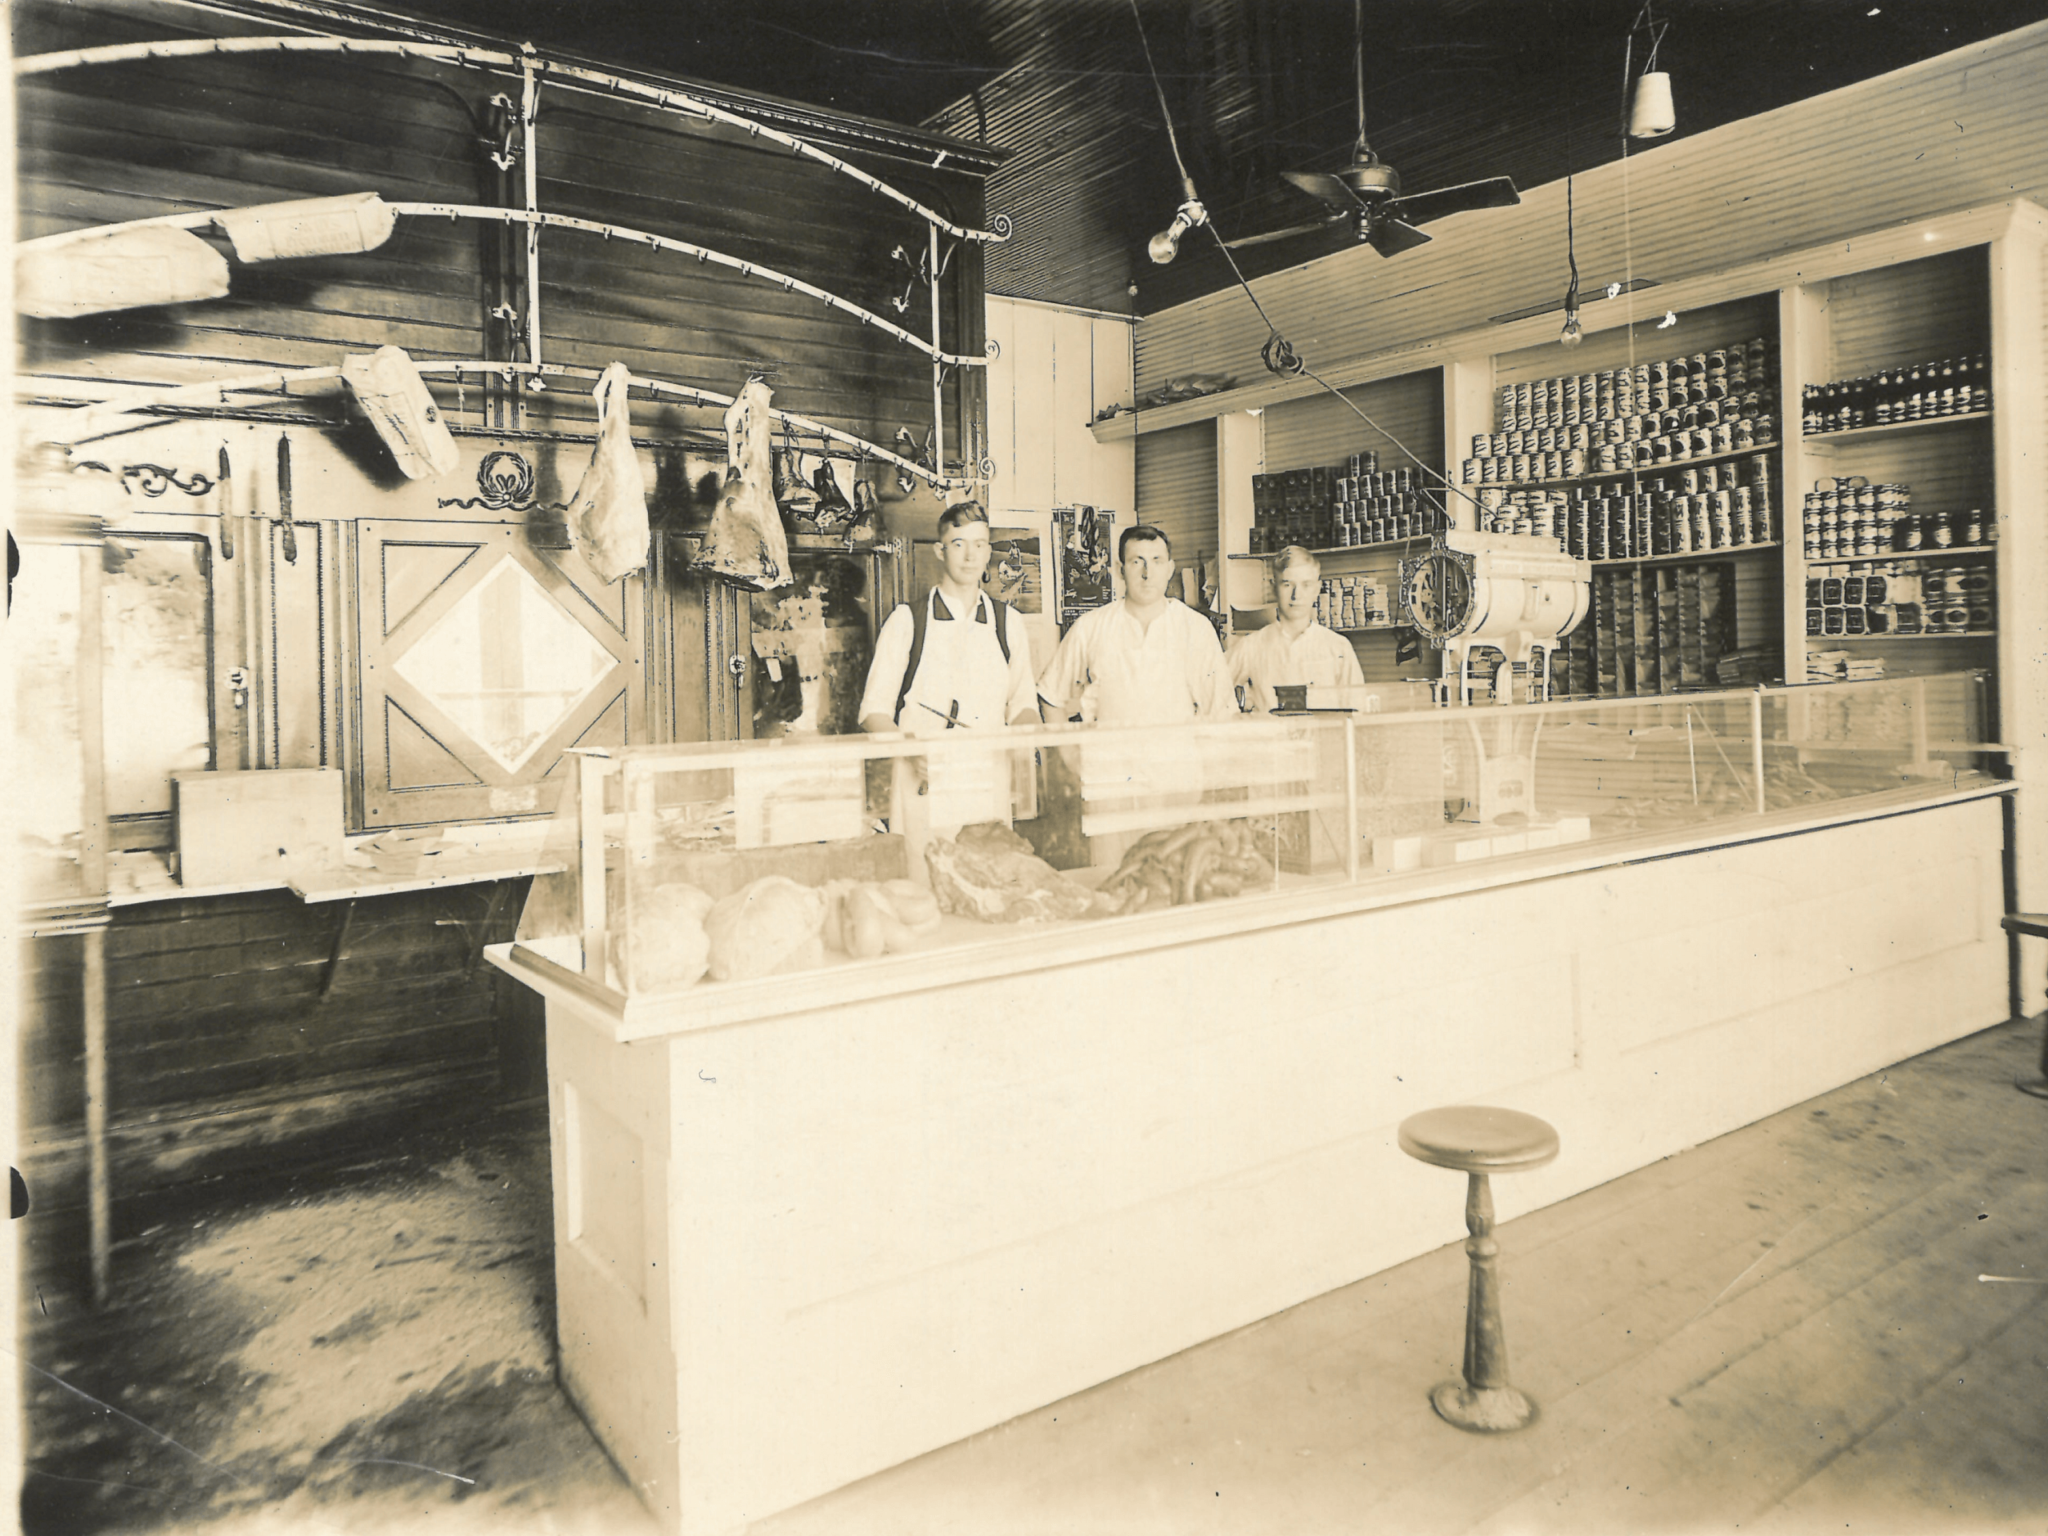 The original Waconia Store in 1916. Behind the counter is, from left to right, Arthur Mackenthun, J. H. Dickhudt and Harvey Mackethun. The original store is said to have been bought from Dickhudt.